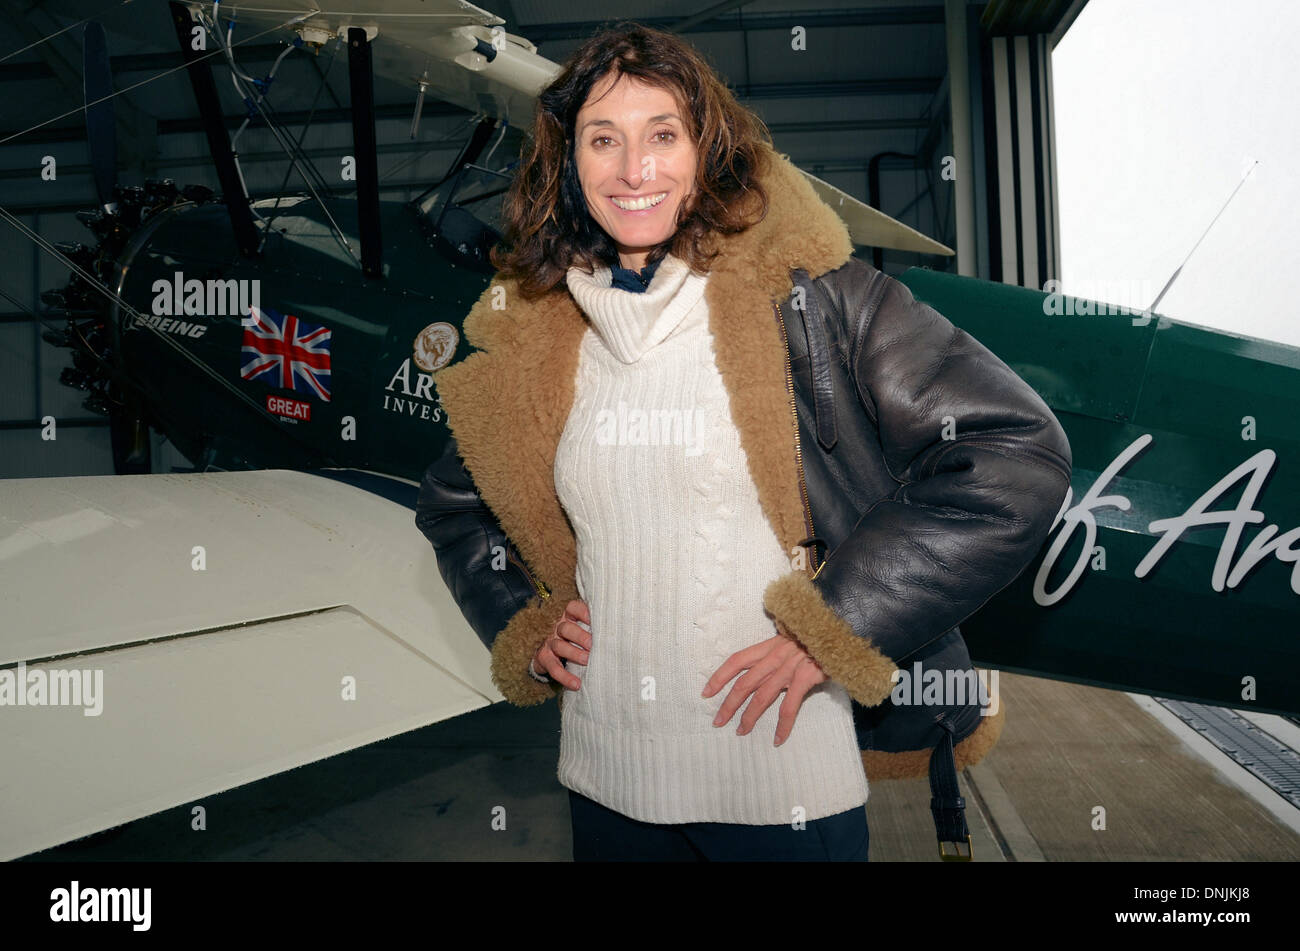 Aviatrix High Resolution Stock Photography and Images - Alamy